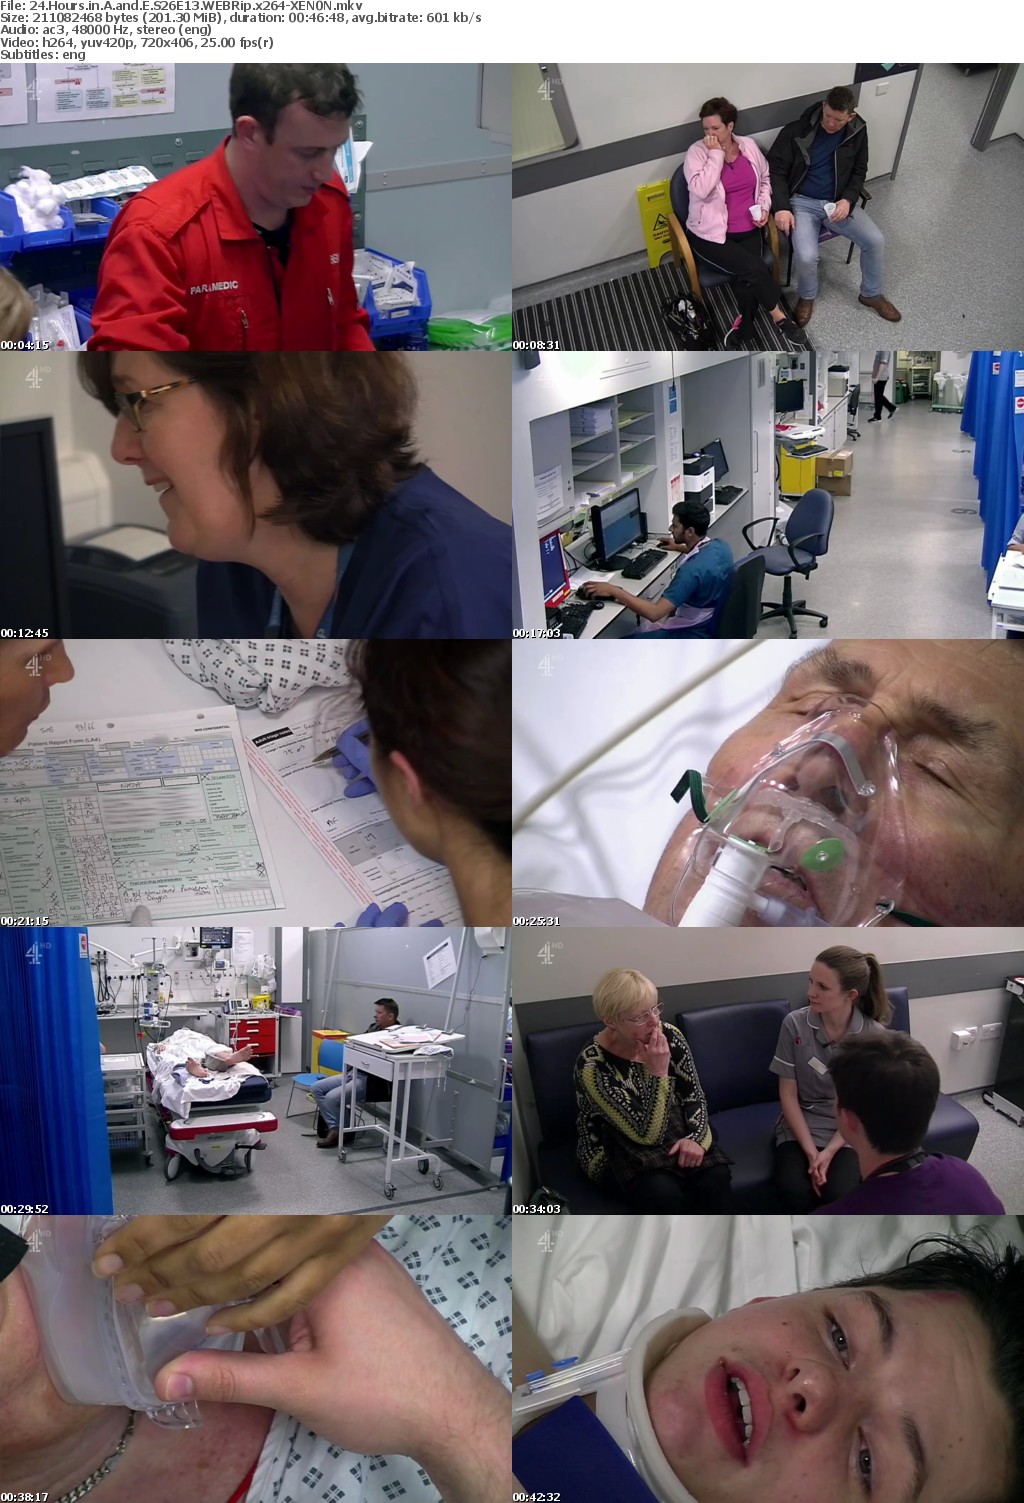 24 Hours in A and E S26E13 WEBRip x264-XEN0N